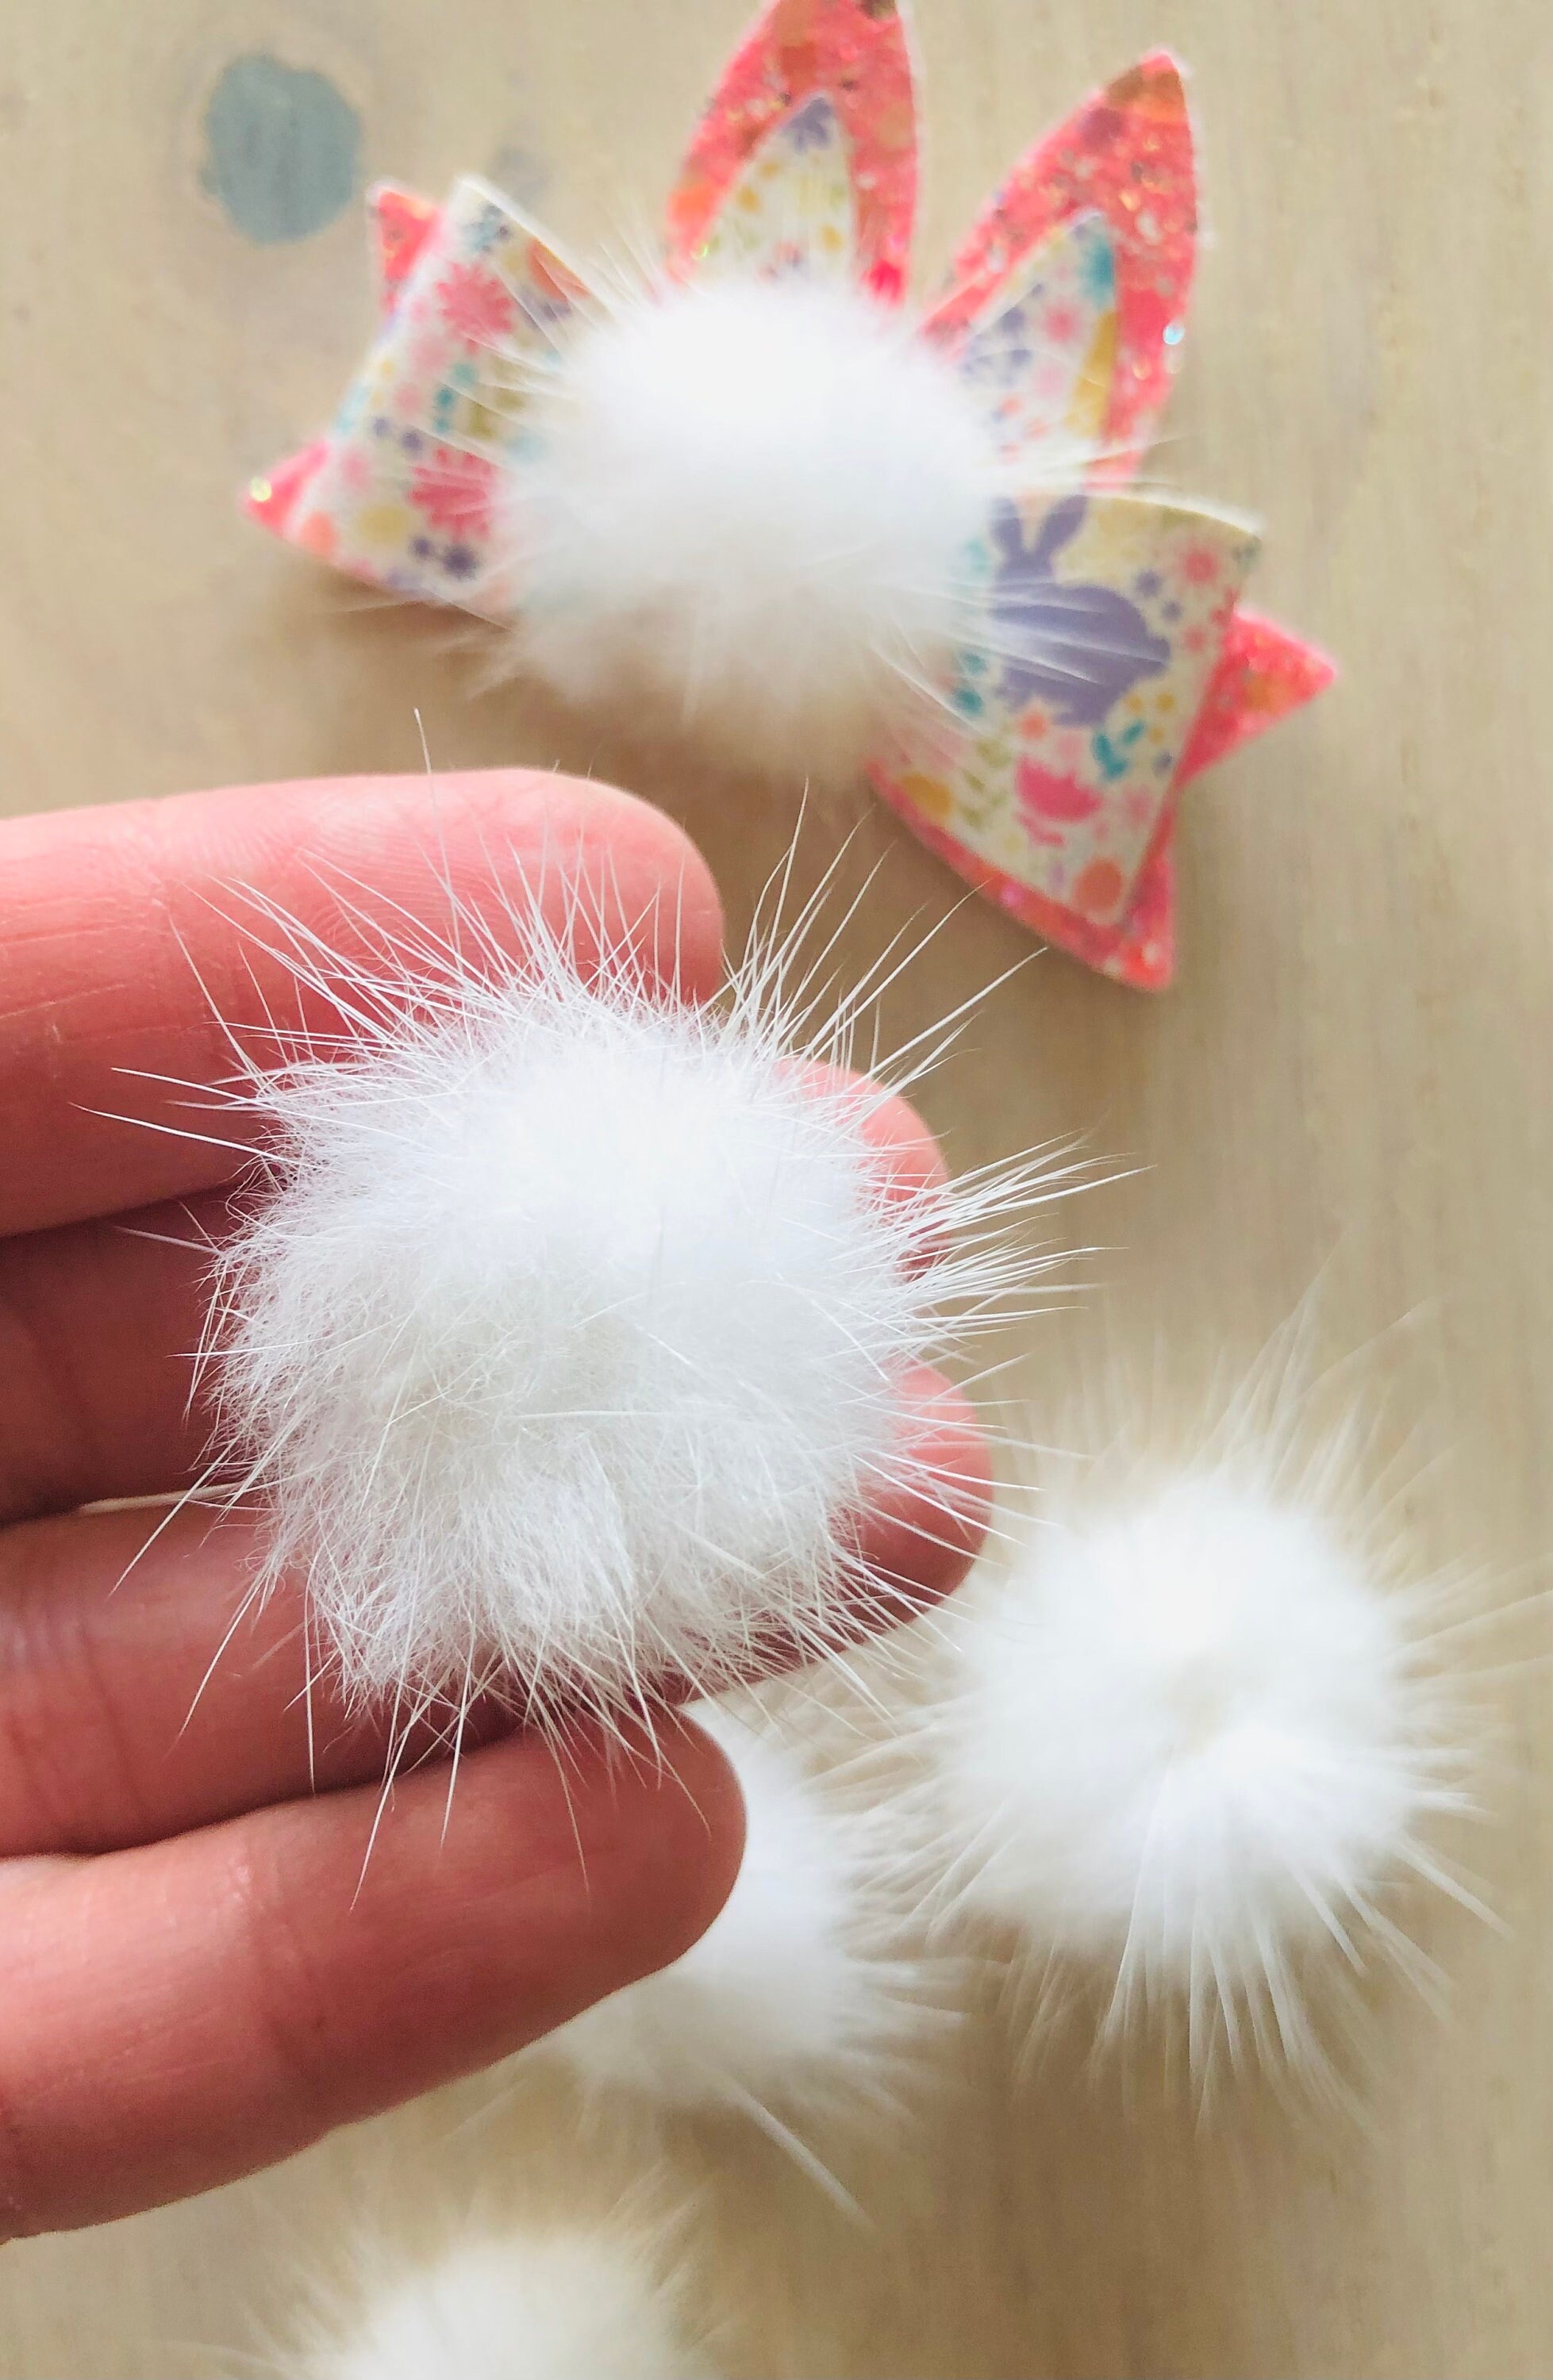 Pom-pom Buttons for Use With Faux Fur and Yarn Pom Poms That 